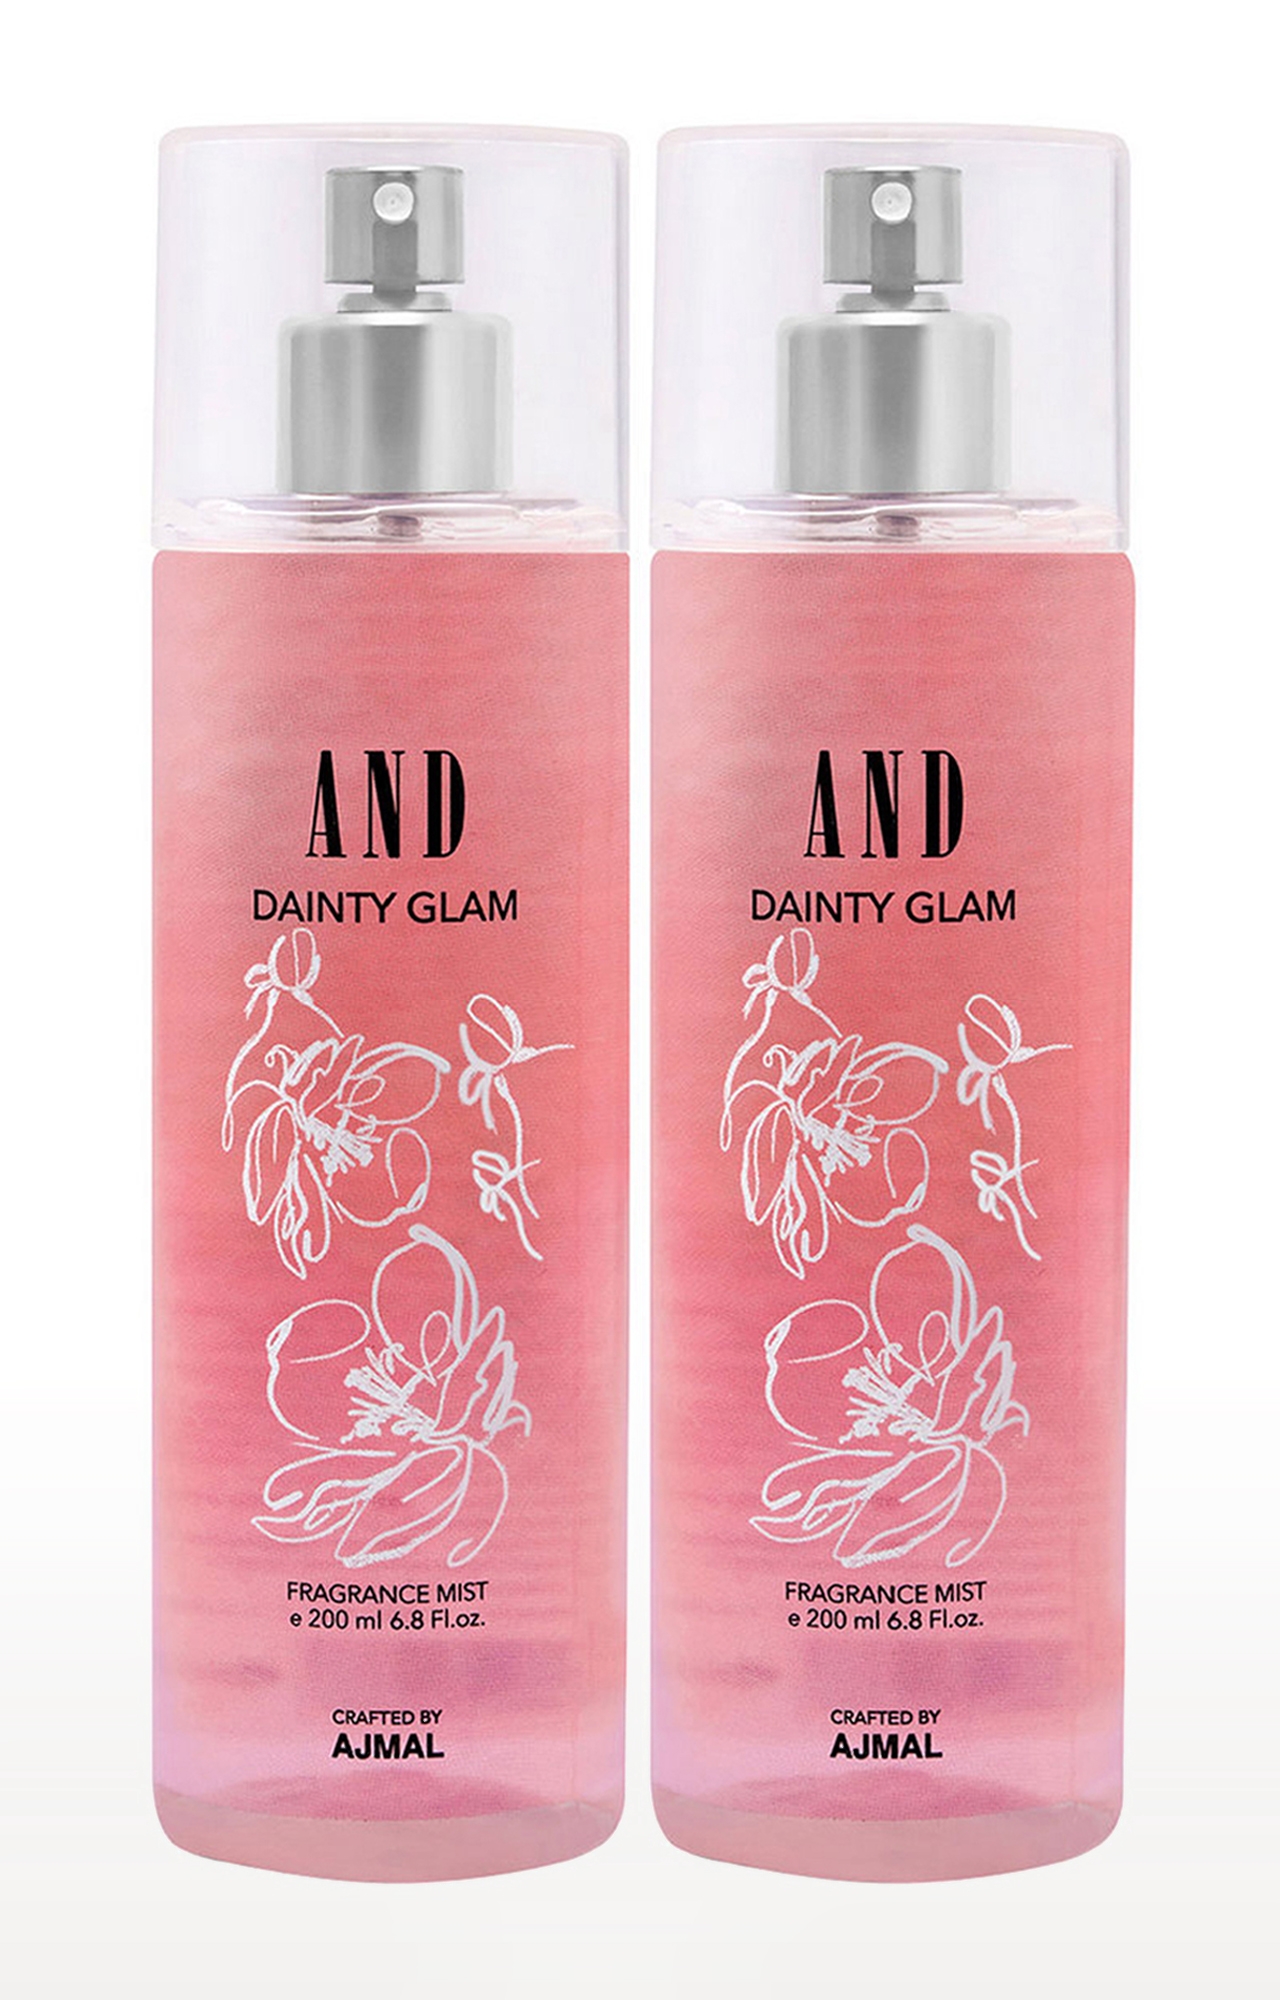 AND Crafted By Ajmal | AND Dainty Glam Pack of 2 Body Mist 200ML each Long Lasting Scent Spray Gift For Women Perfume Crafted by Ajmal FREE 0